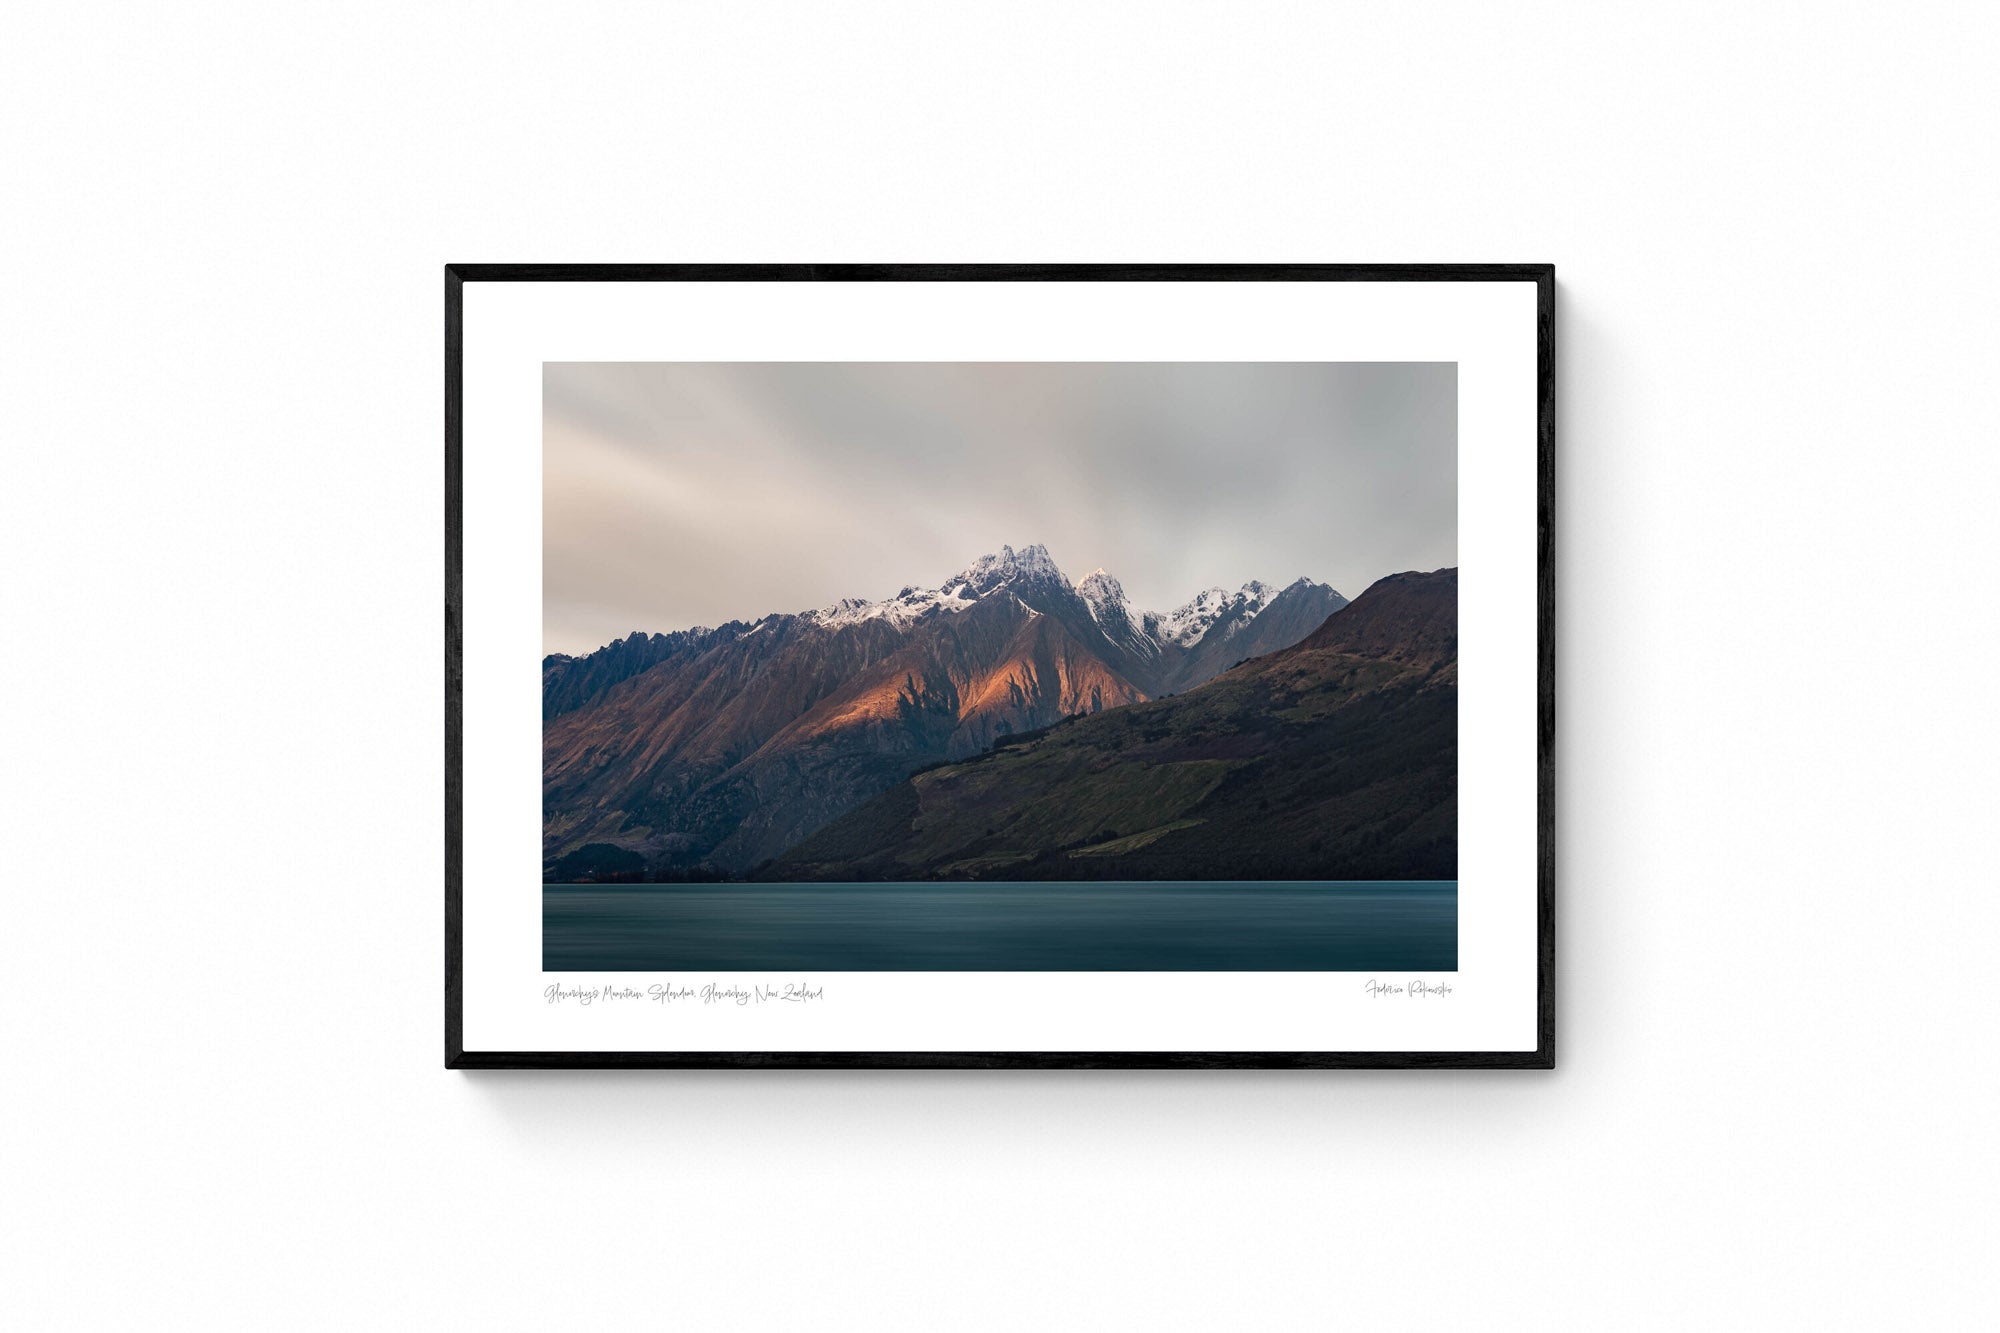 Last light of dusk casting a warm glow on the snowy peaks of mountains in Glenorchy, New Zealand, with a calm lake in the foreground.